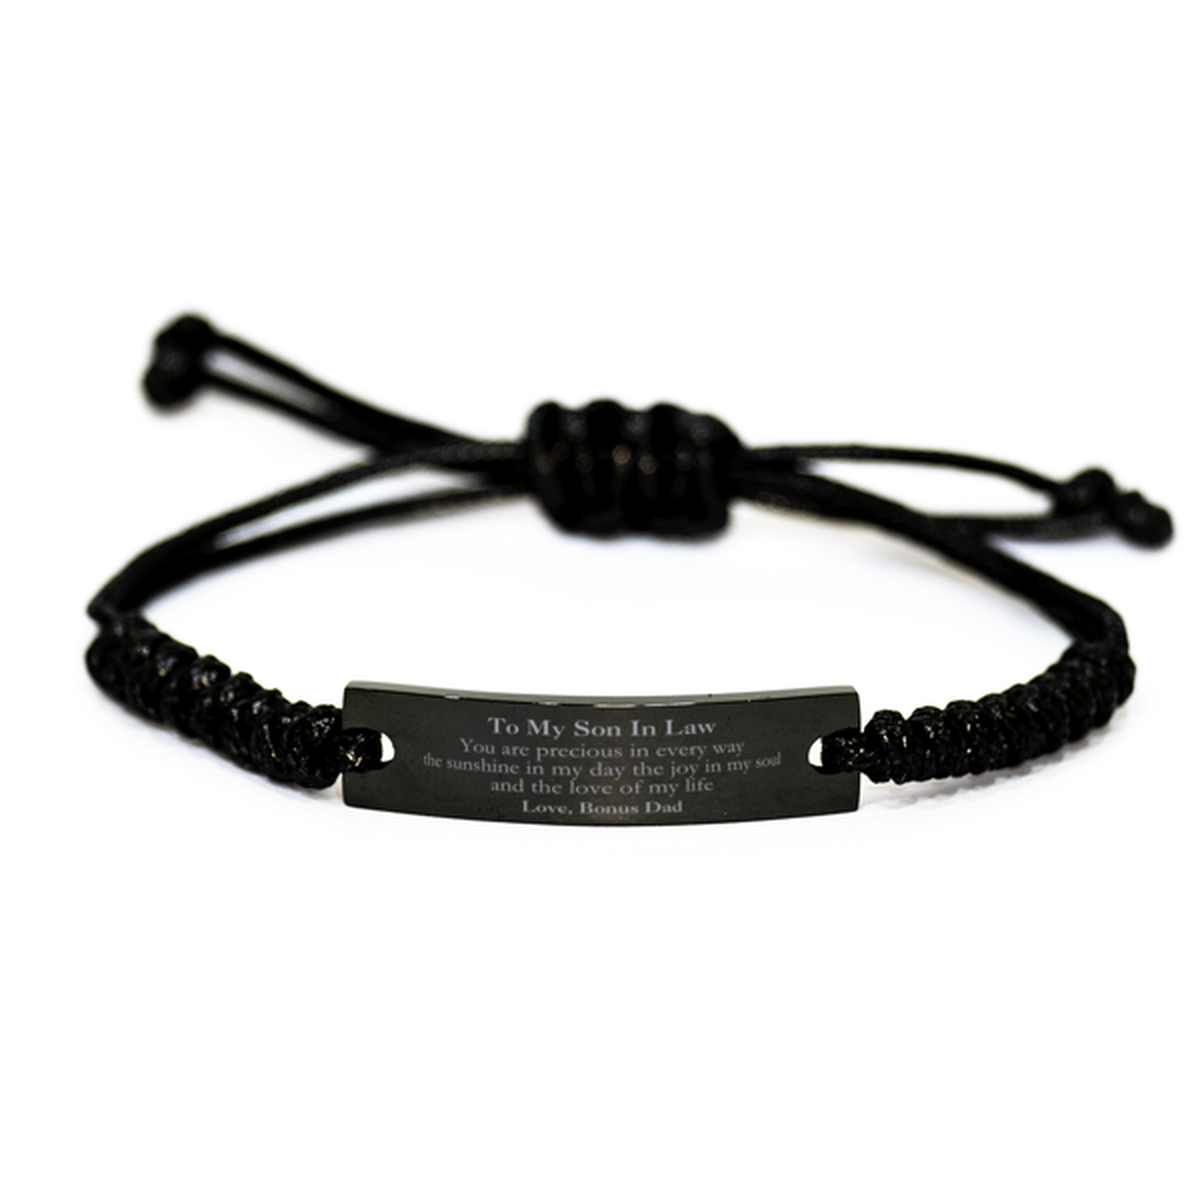 Graduation Gifts for Son In Law Black Rope Bracelet Present from Bonus Dad, Christmas Son In Law Birthday Gifts Son In Law You are precious in every way the sunshine in my day. Love, Bonus Dad